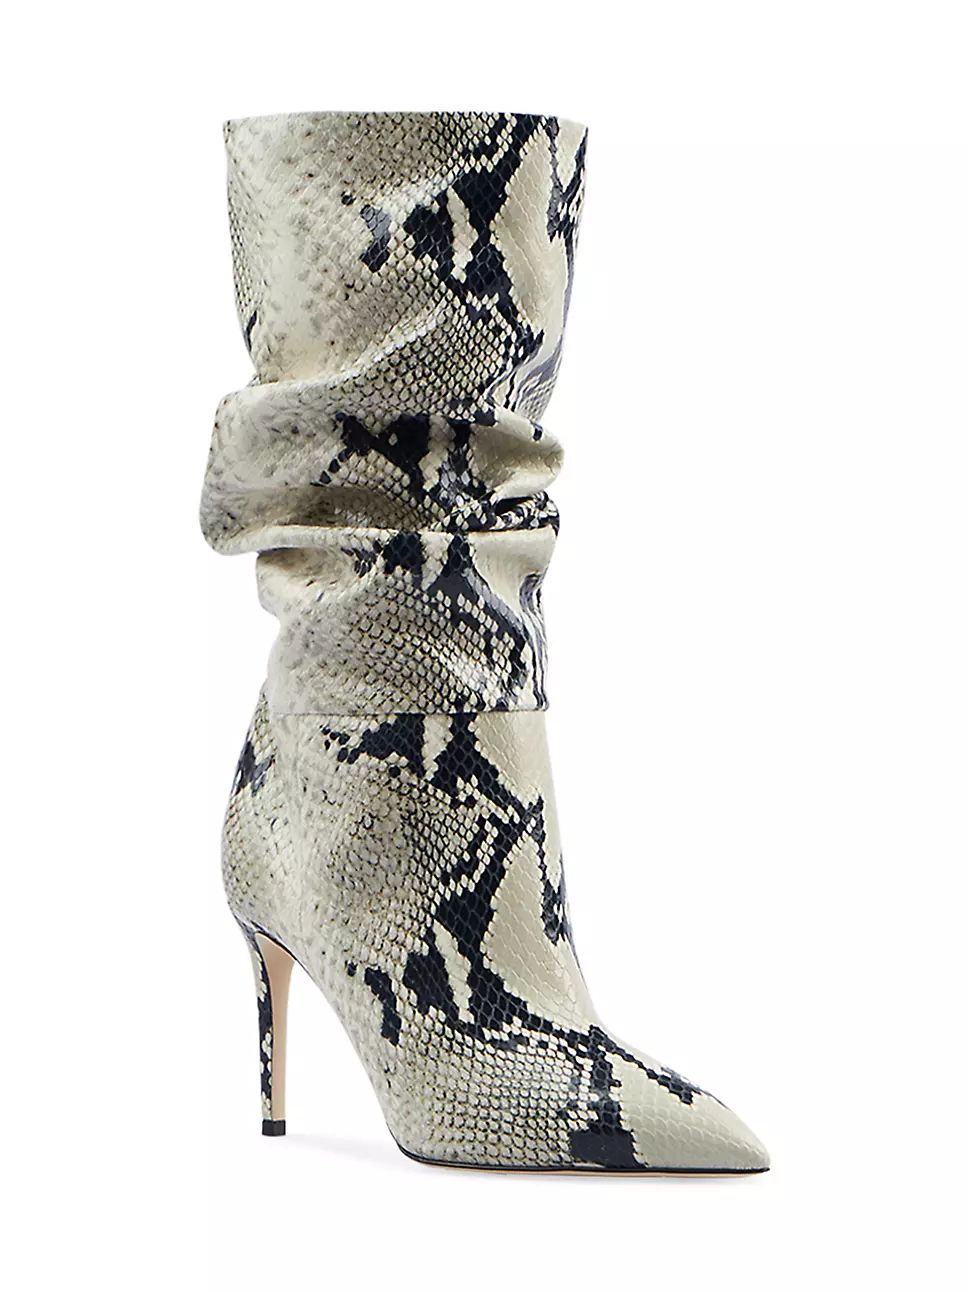 Slouchy Snakeskin-Embossed Stiletto Boots | Saks Fifth Avenue